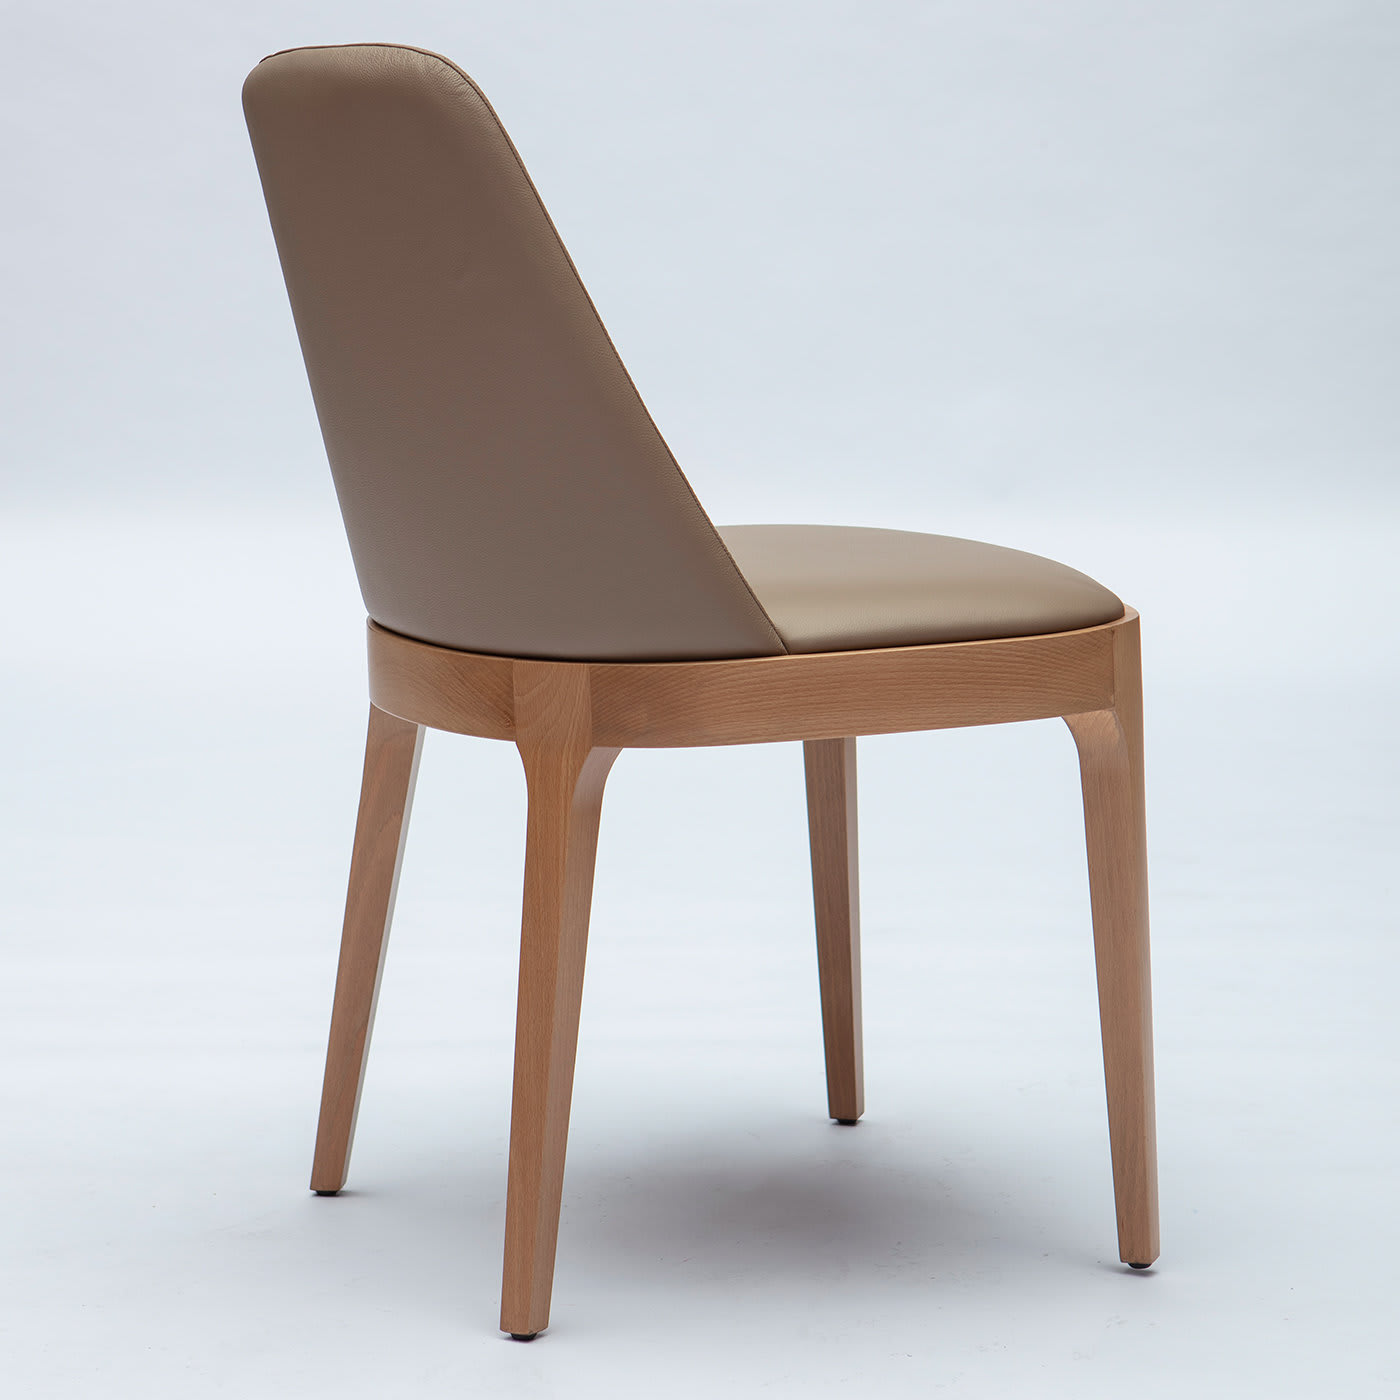 Club 24 leather dining chair - Livoni